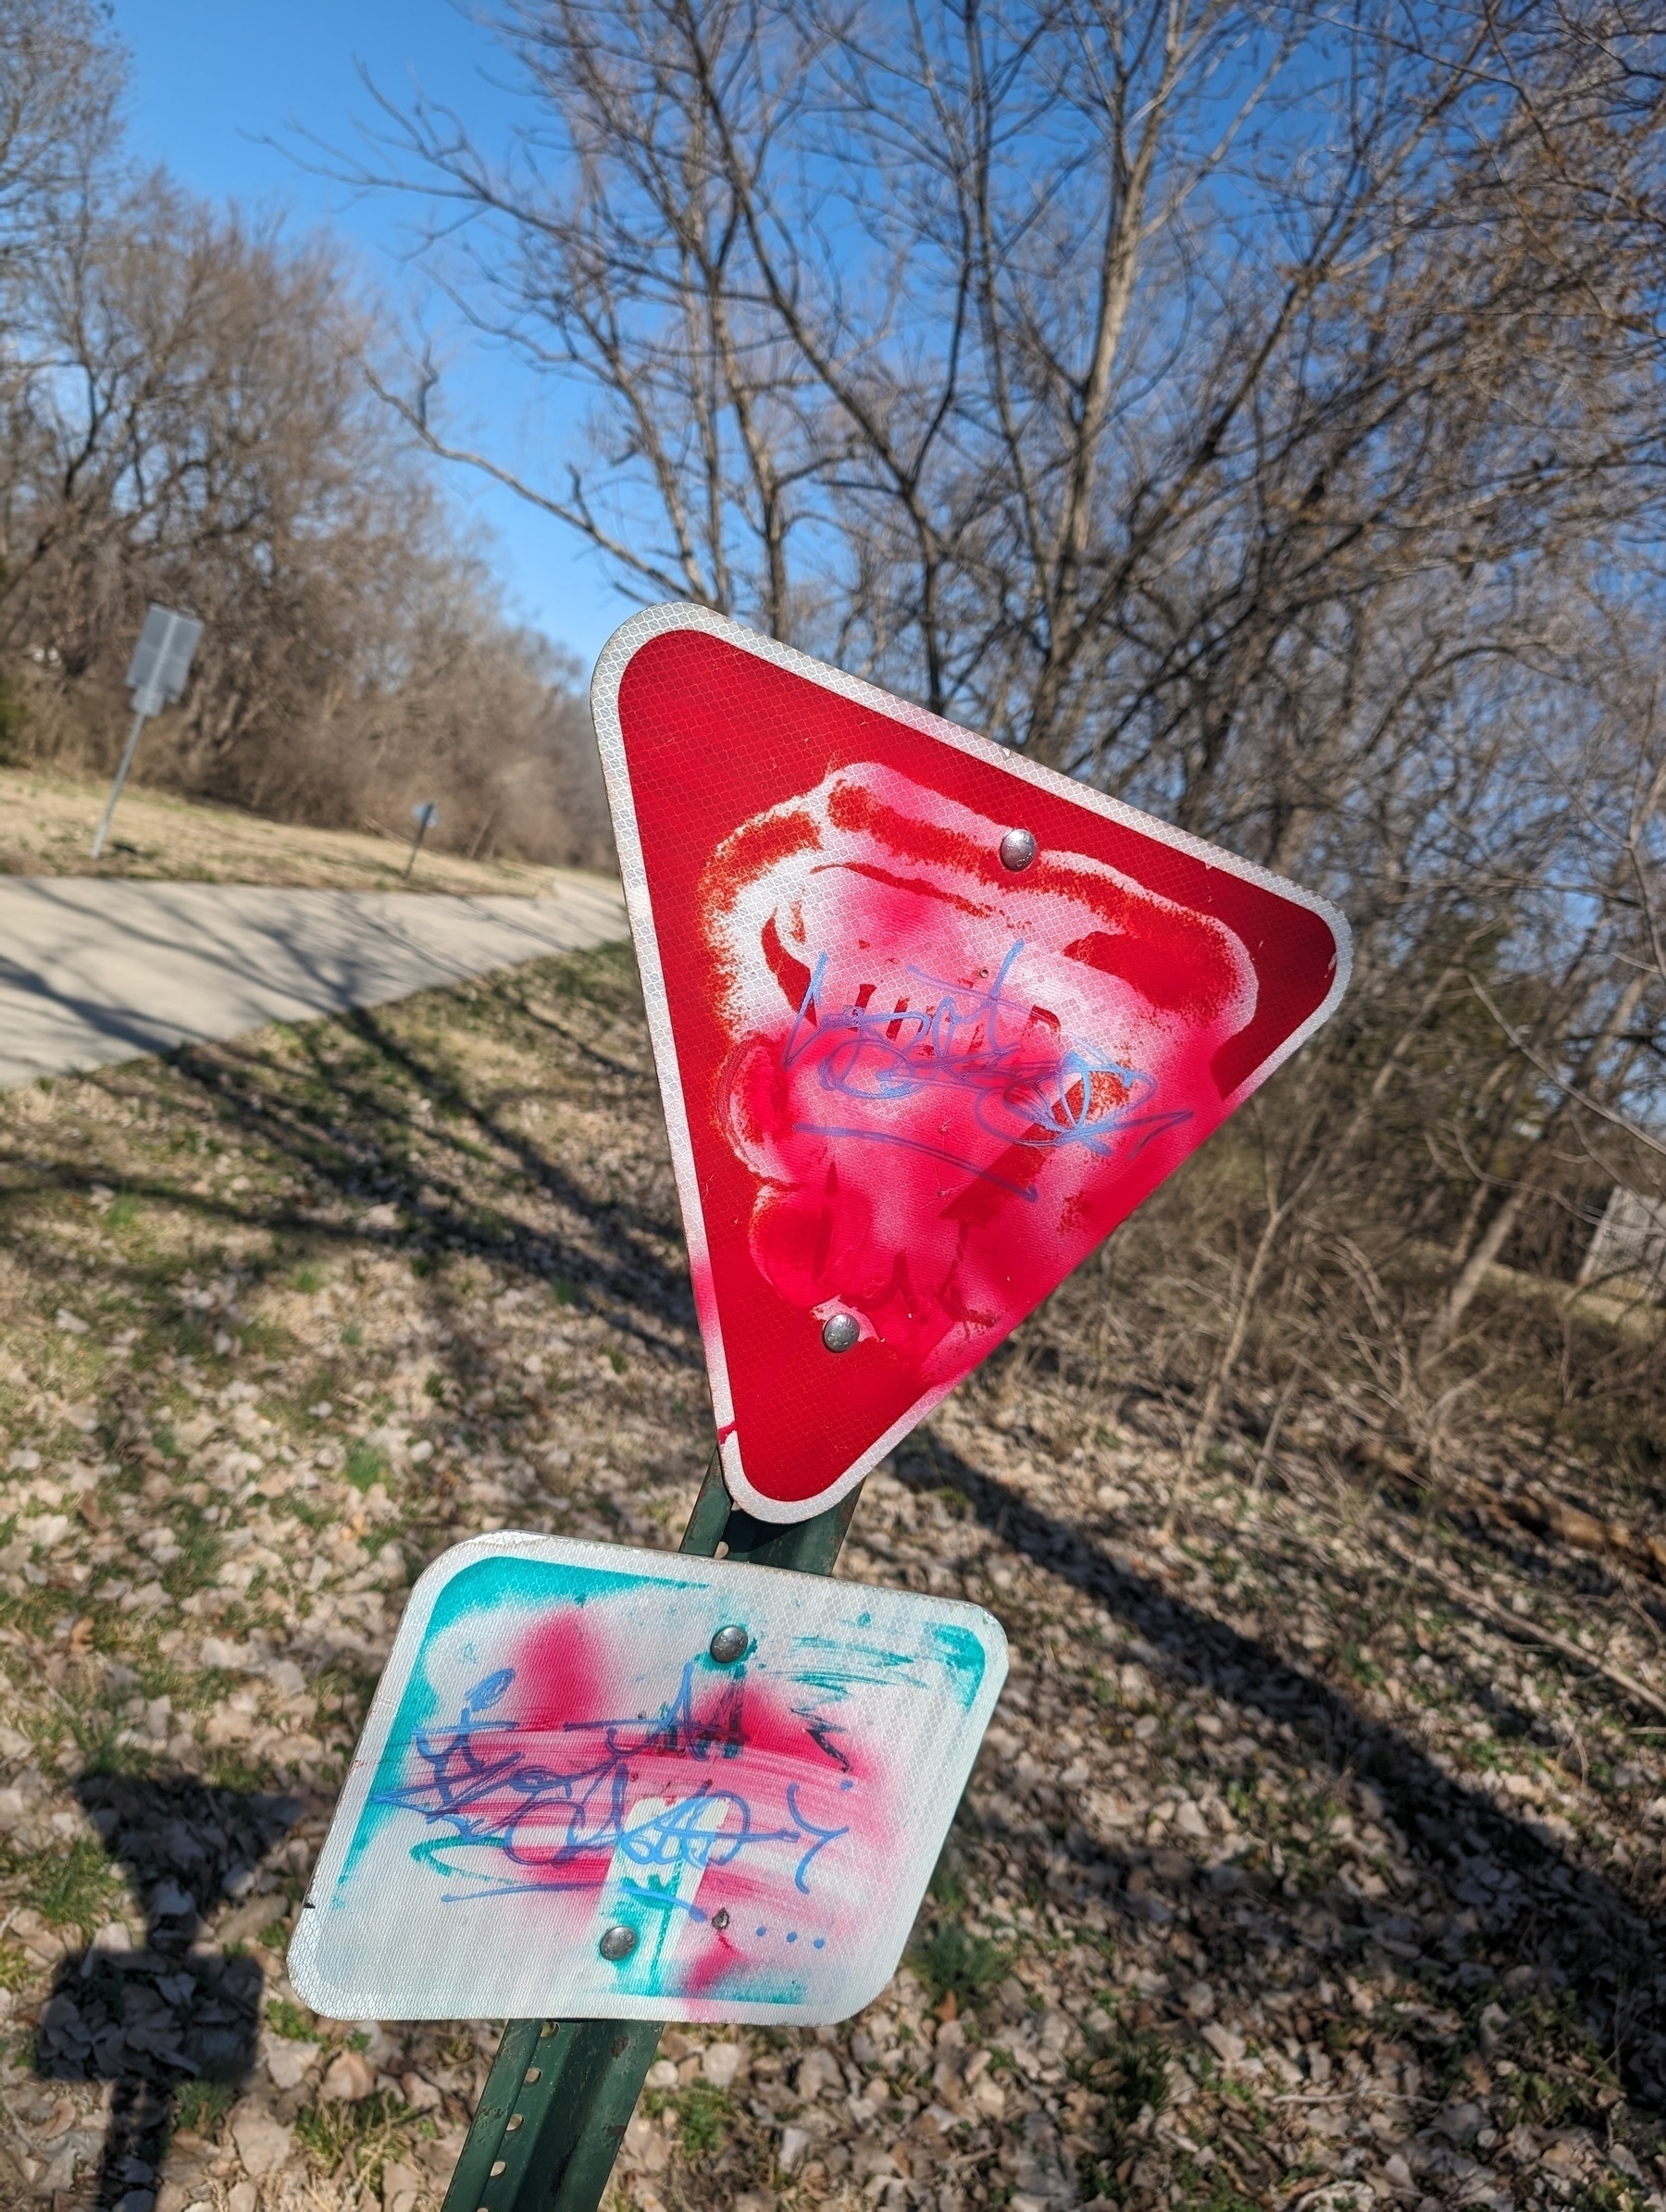 Photo of a Yield sign that has been spray painted over with more red. Beneath that is another unknown sign that is also spray painted over.